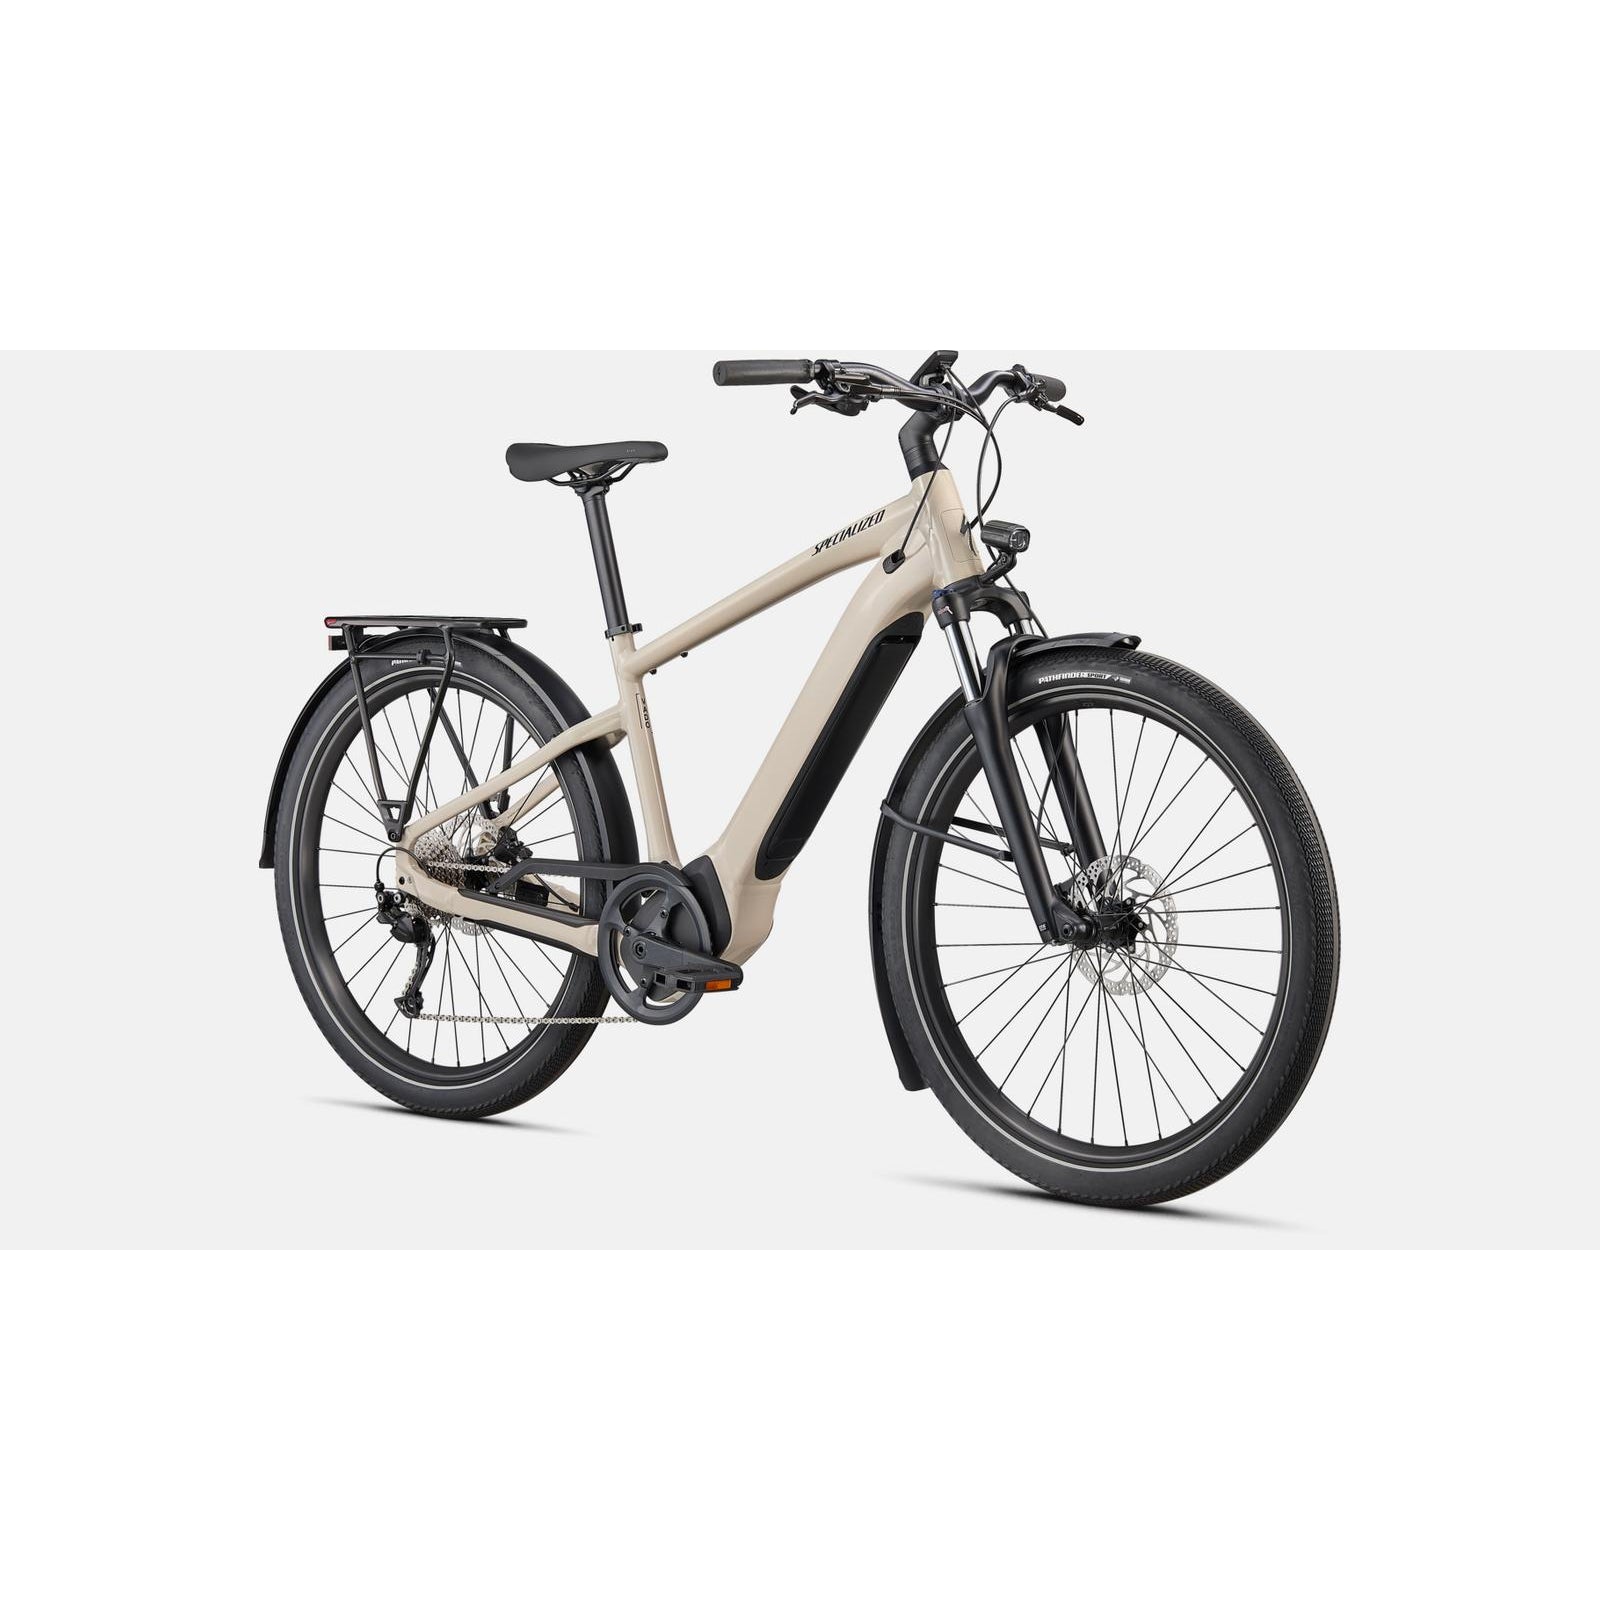 Specialized Turbo Vado 3.0 Active Electric Bike - Bikes - Bicycle Warehouse